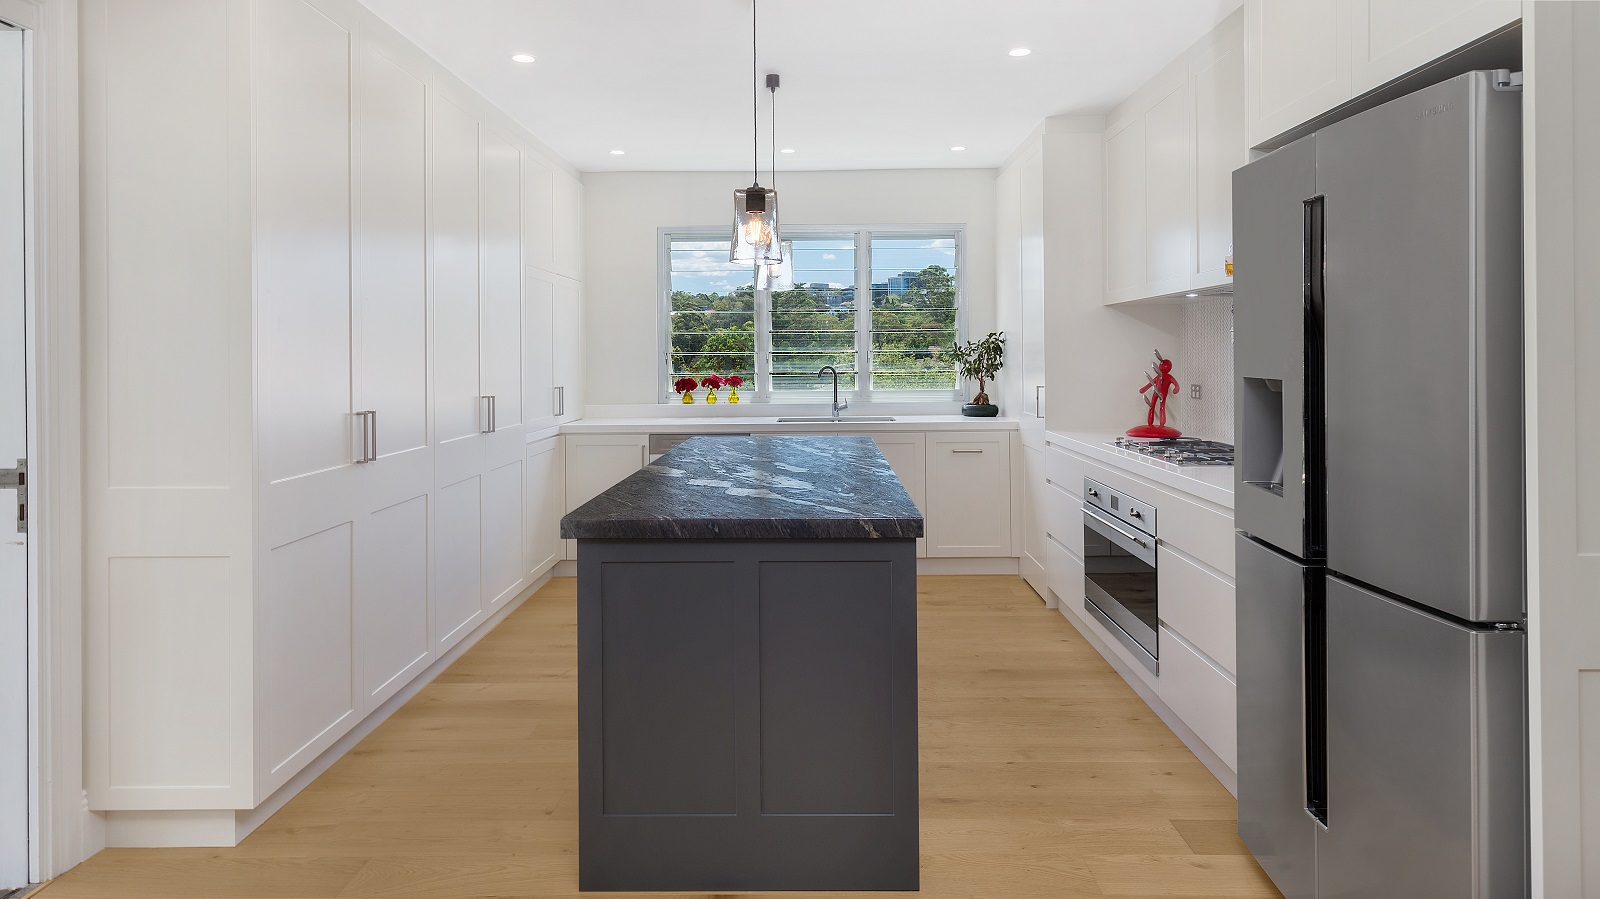 Greenwich, Shaker Style kitchen in a polyurethane finish with a Cosmic Black Granite benchtop